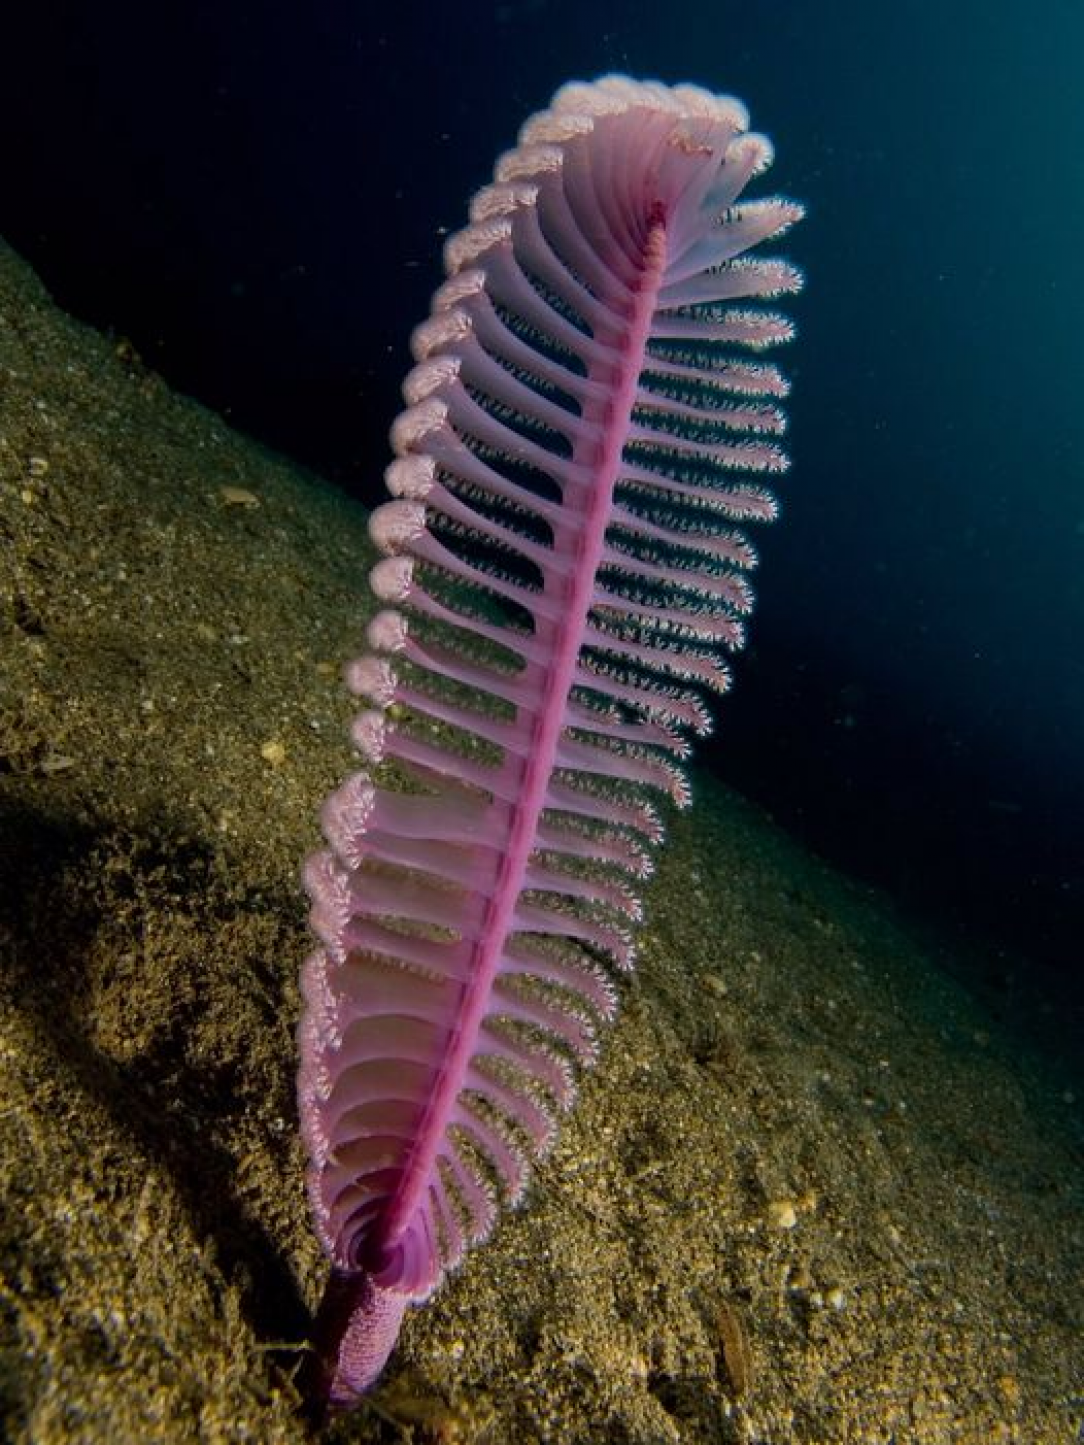 Purple Sea Pen. Yes, this an actual sea animal, not a plant. Actually, it is a lot of little animals stacked together to form a long plume